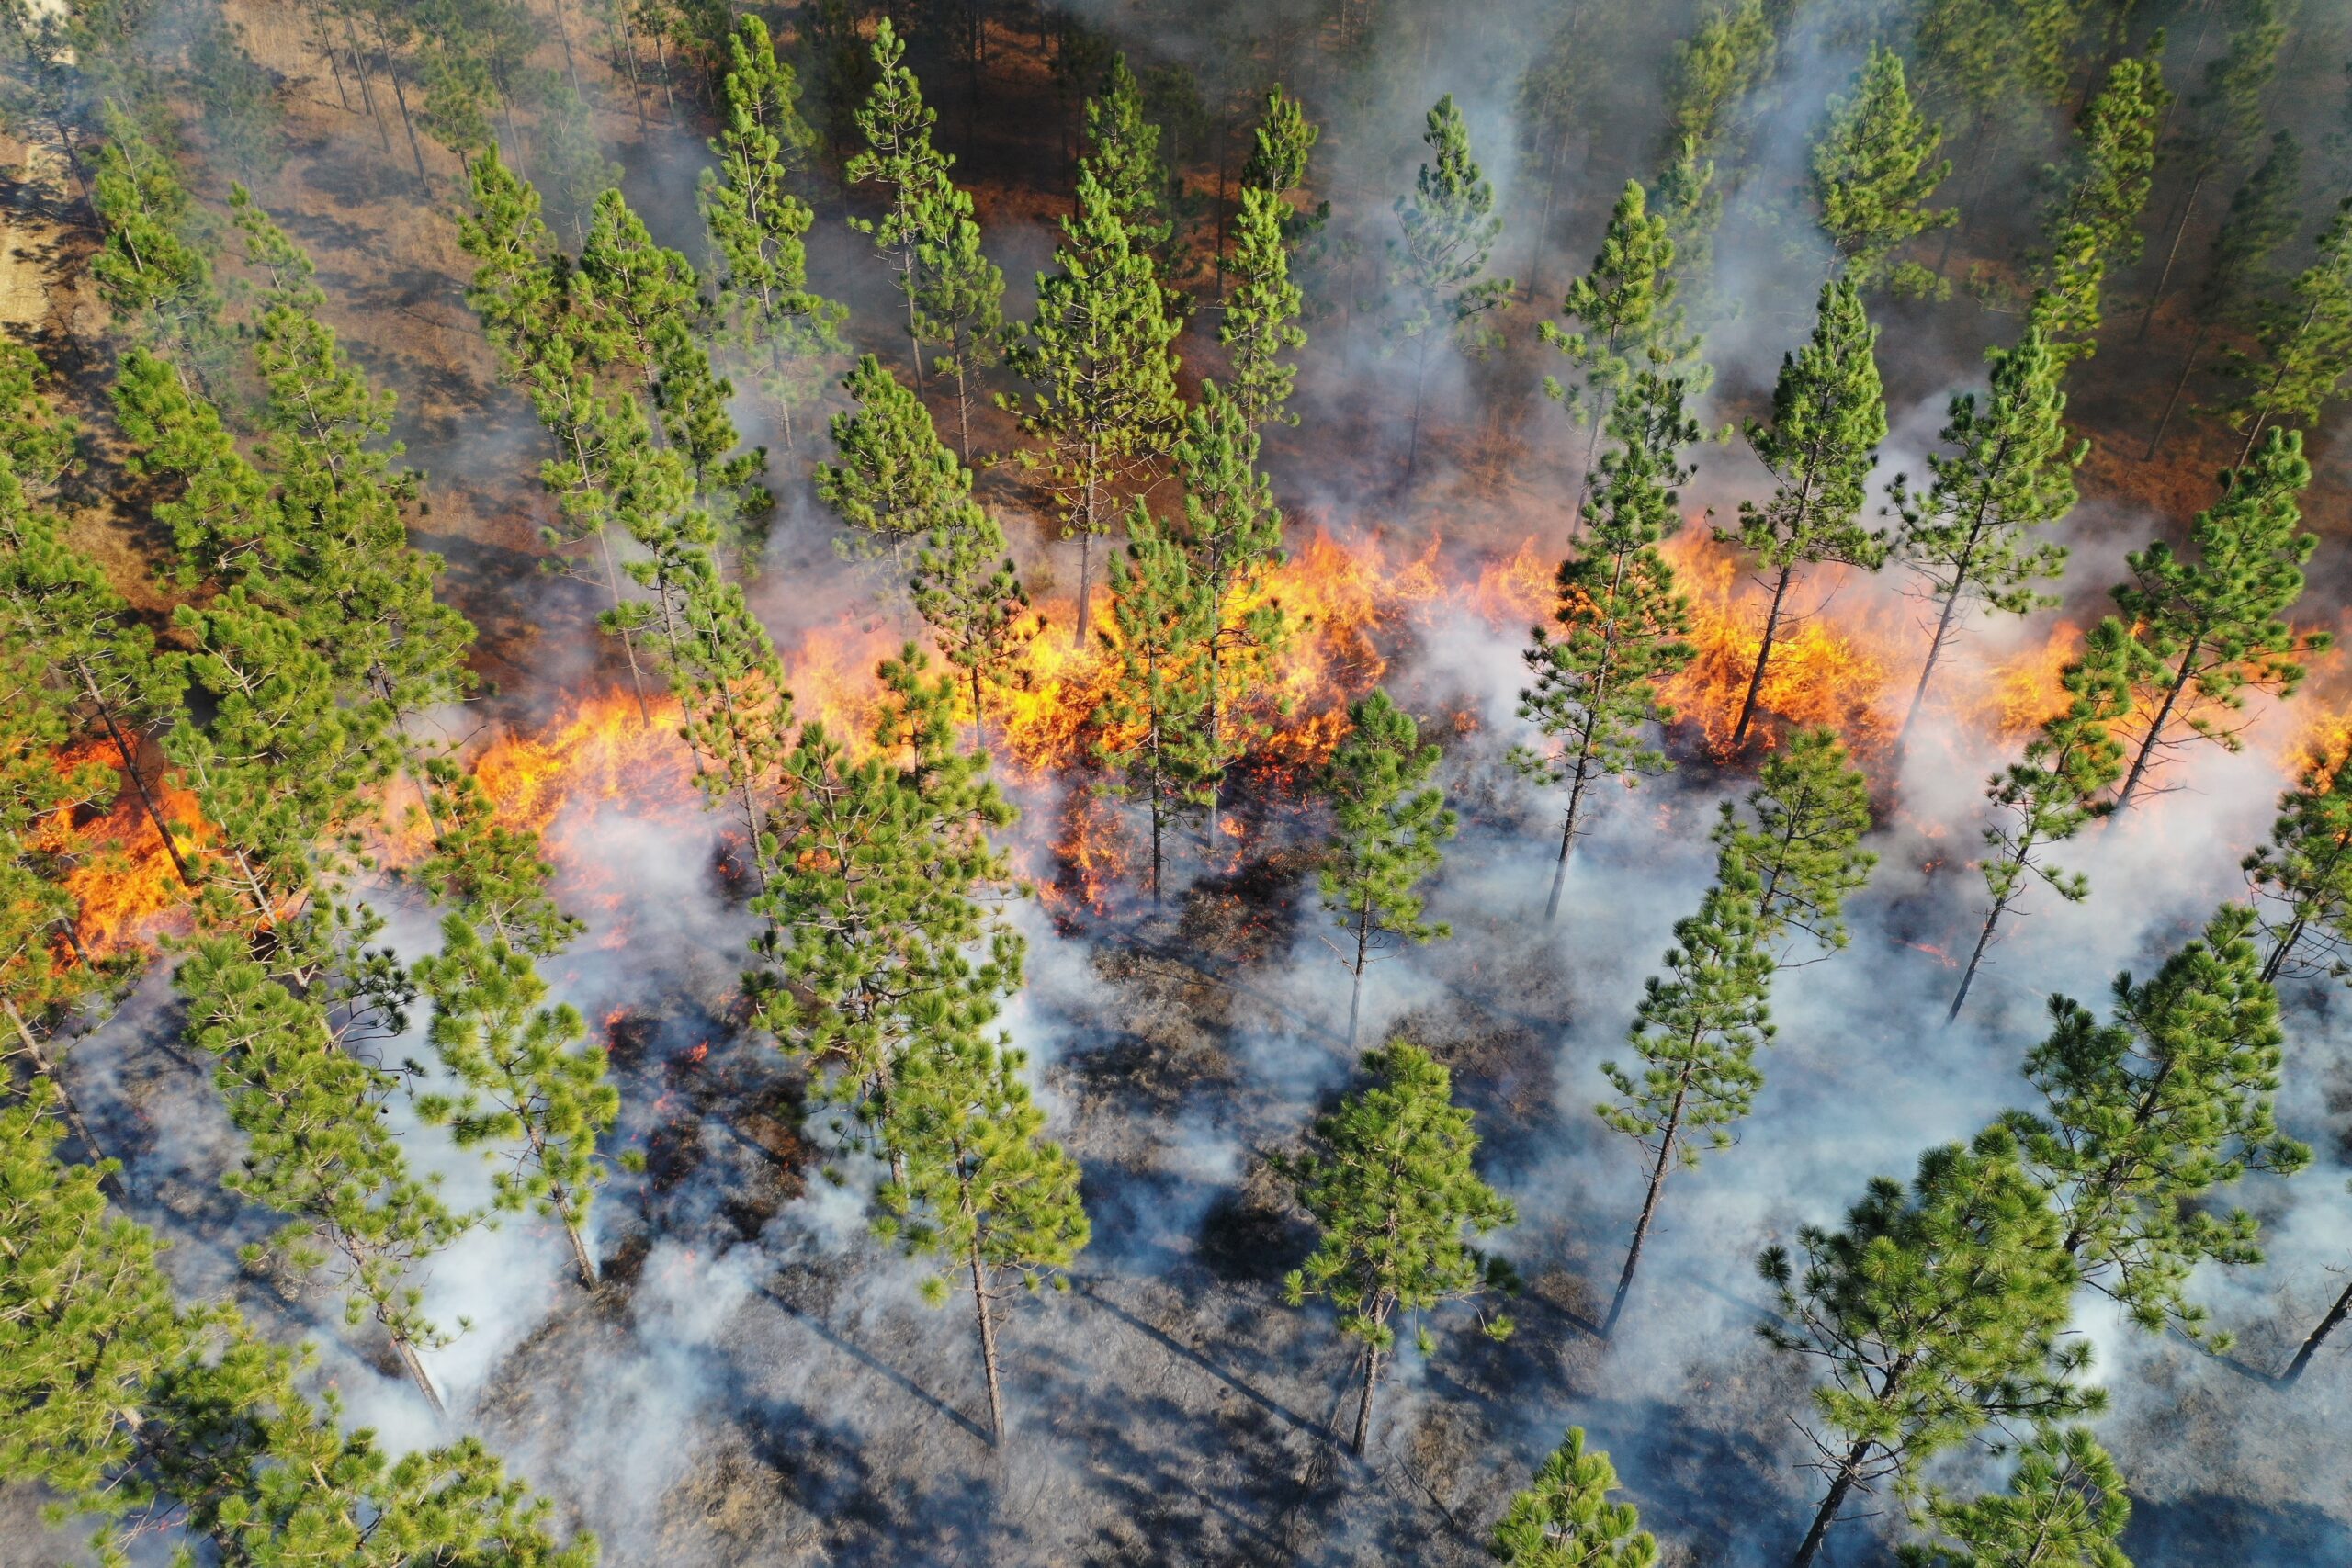 image: An aerial view of a prescribed burn under longleaf pine trees.